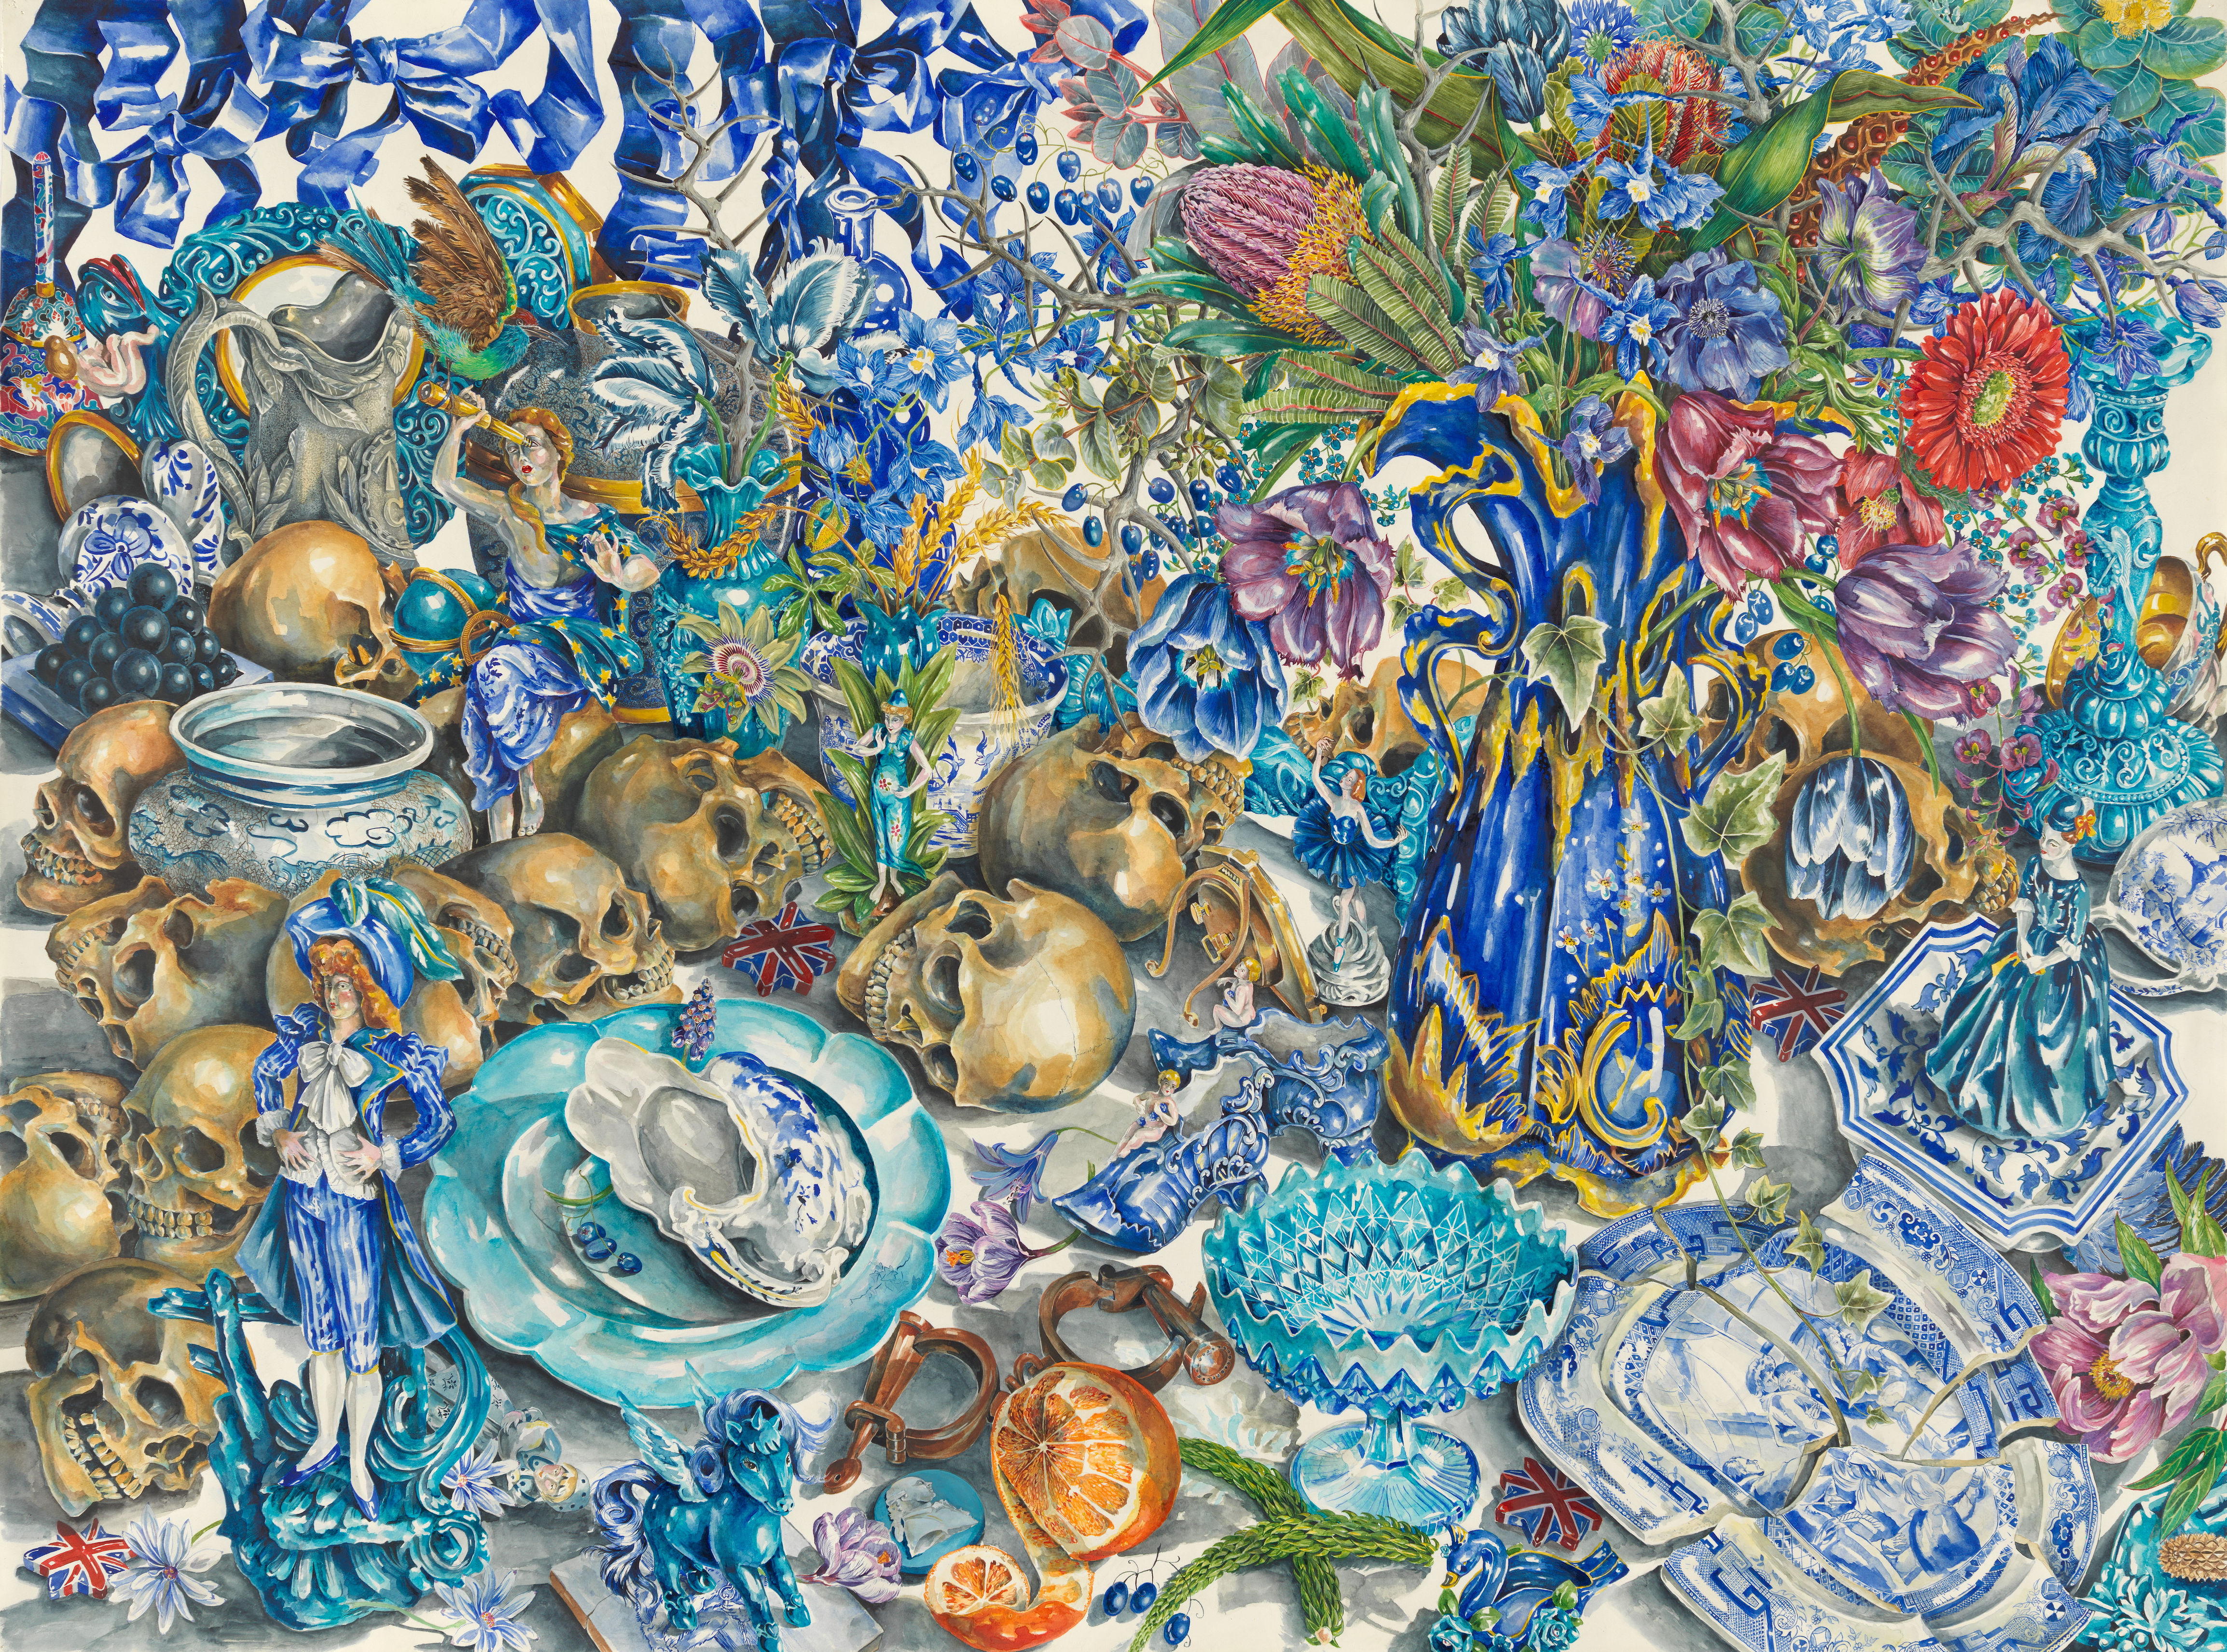 A highly detailed blue and gold toned painting of an opulent table with fine china settings, and several golden skulls.